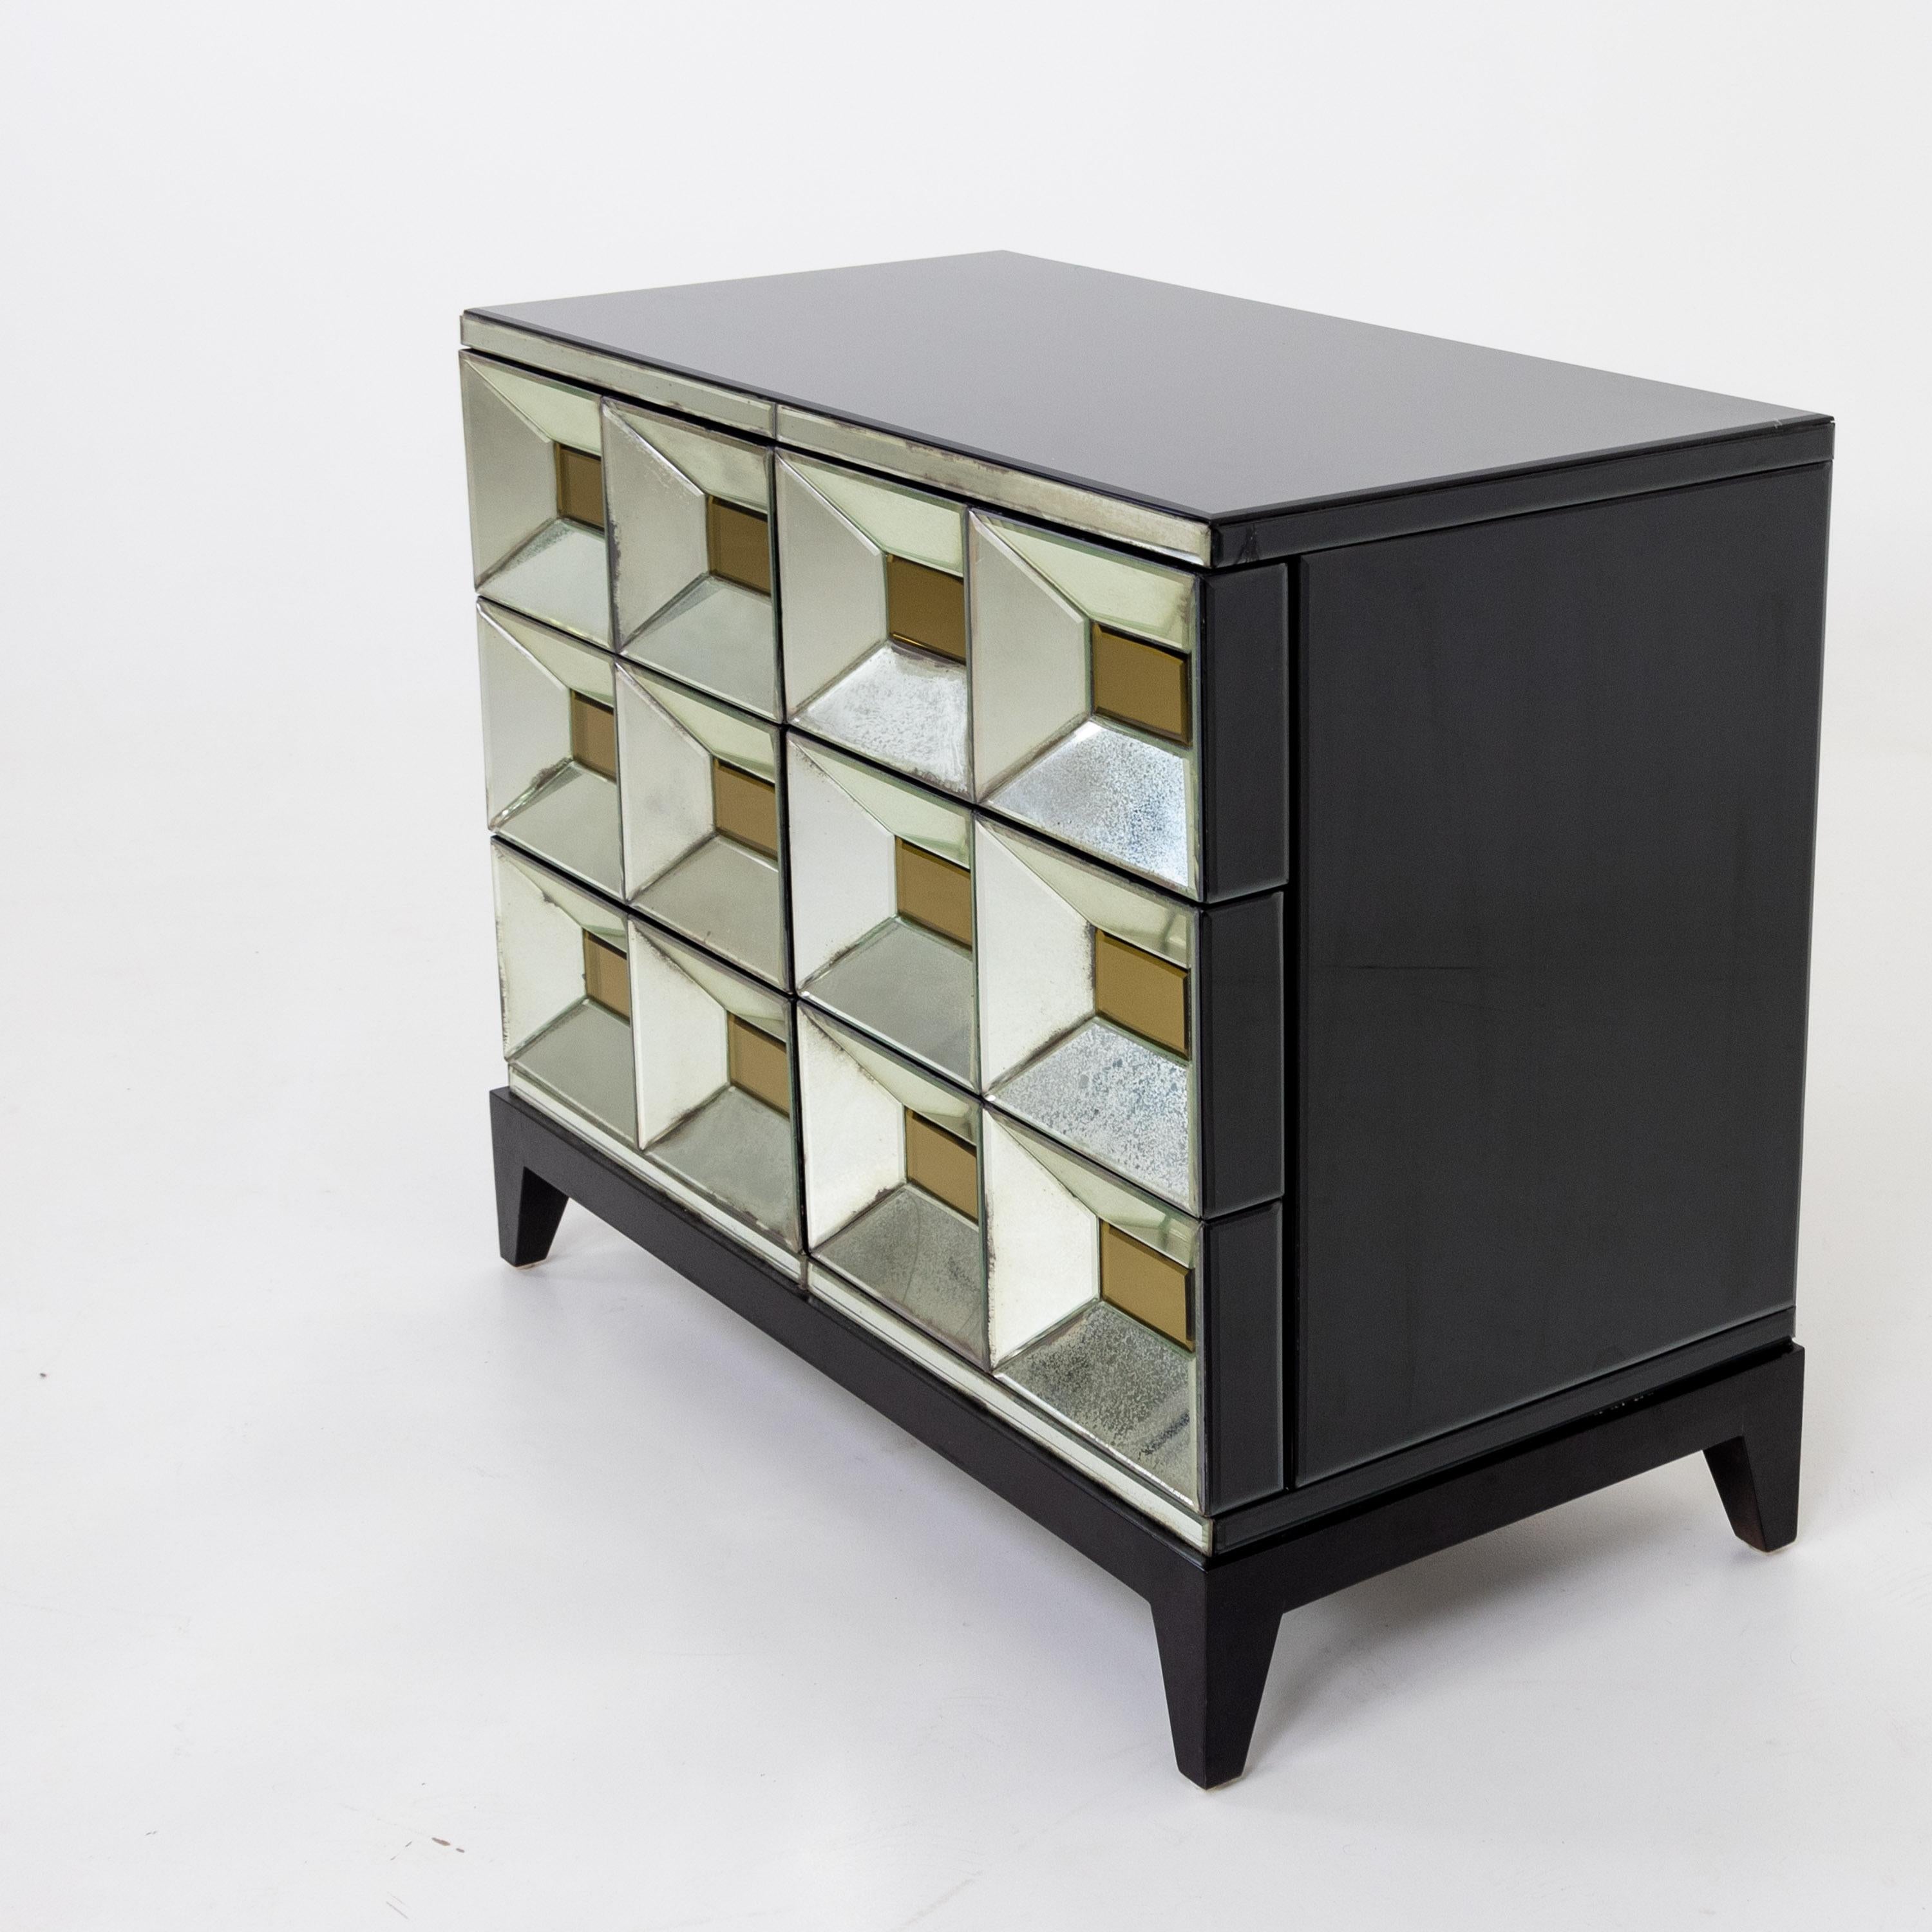 Six-drawer dresser from the Ode's Design series by Olivier de Schrijver with mirrored surfaces with gold-colored panes and dark glass top. Signed, inscribed and numbered on the back.